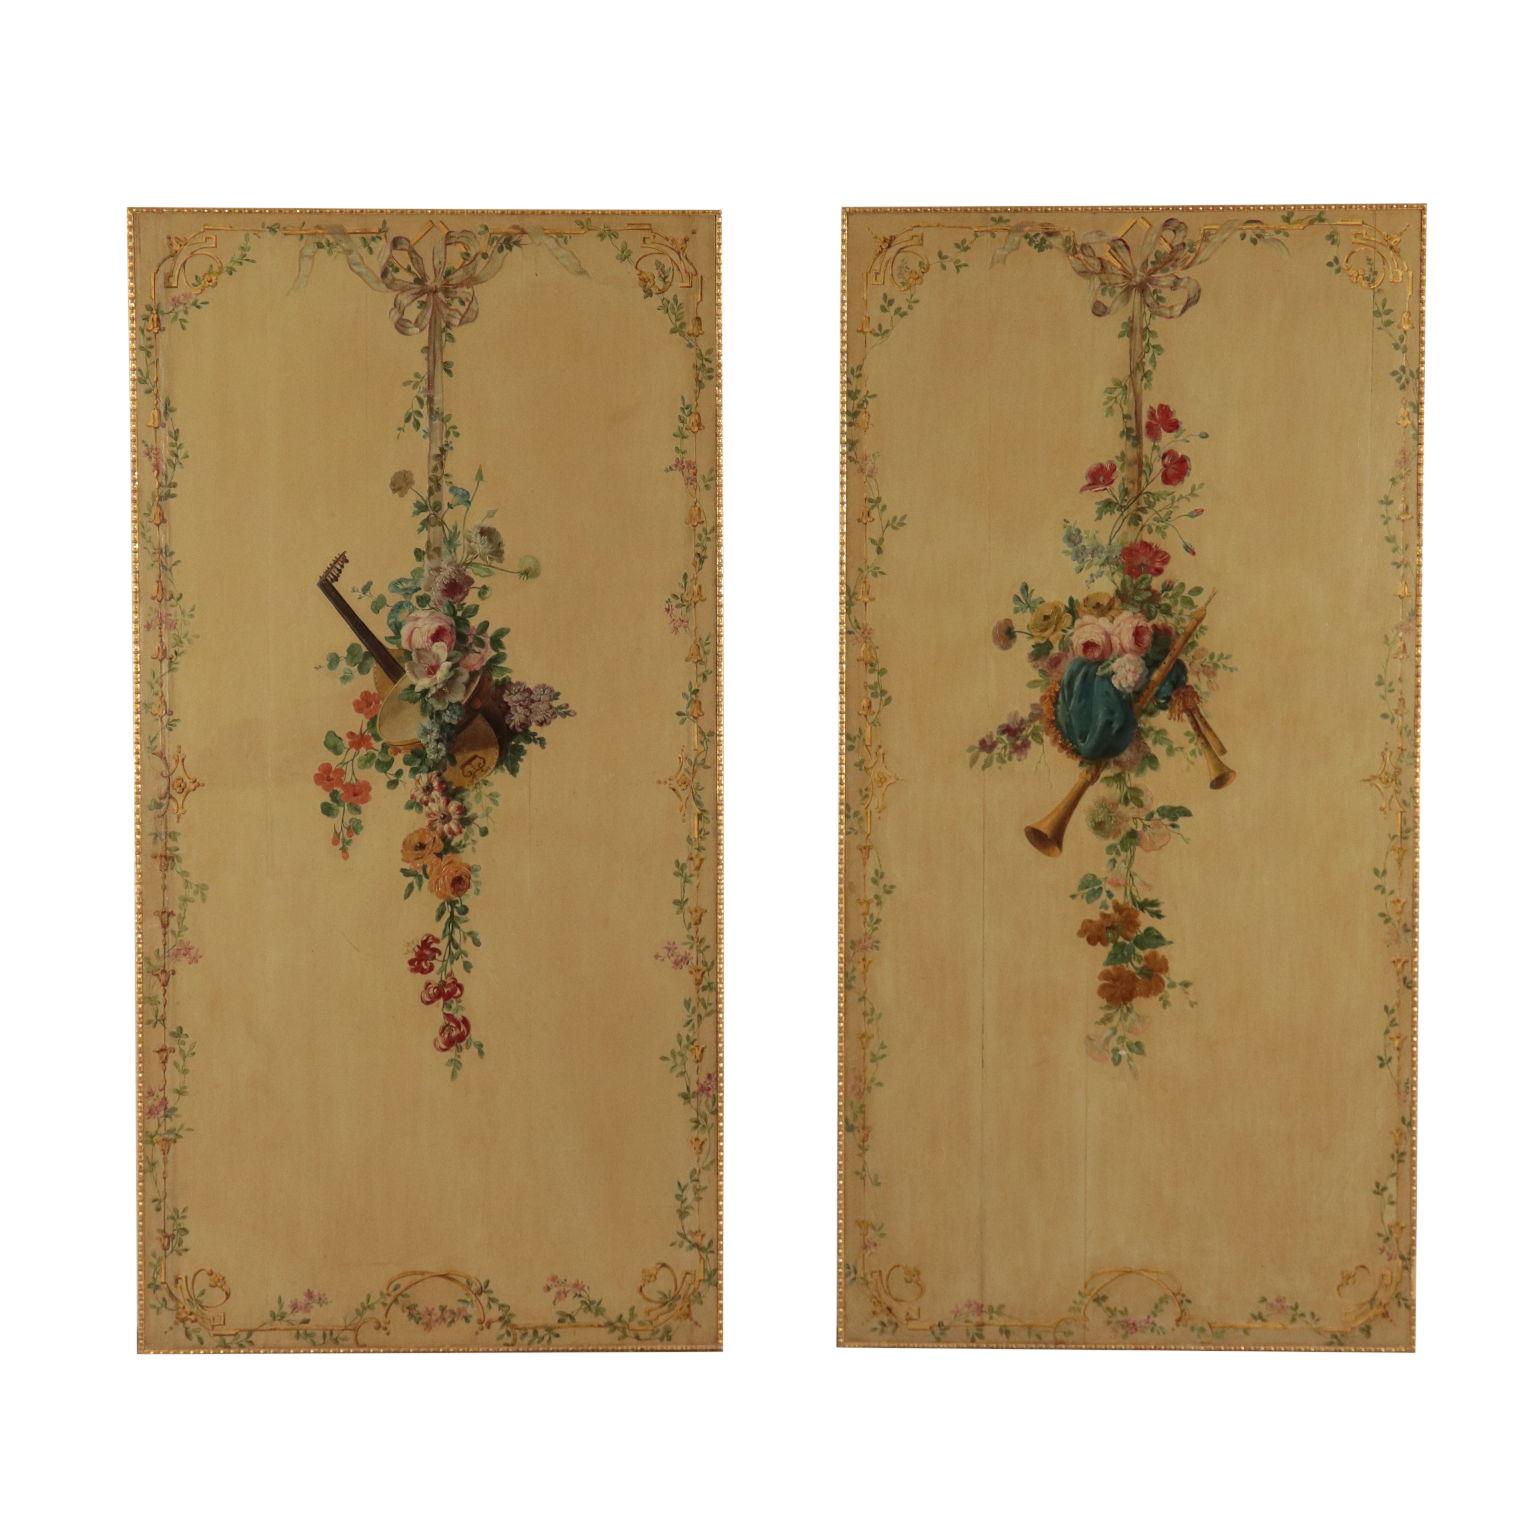 Boiserie Decorative Panels, Italy 19th Century - Art by Unknown